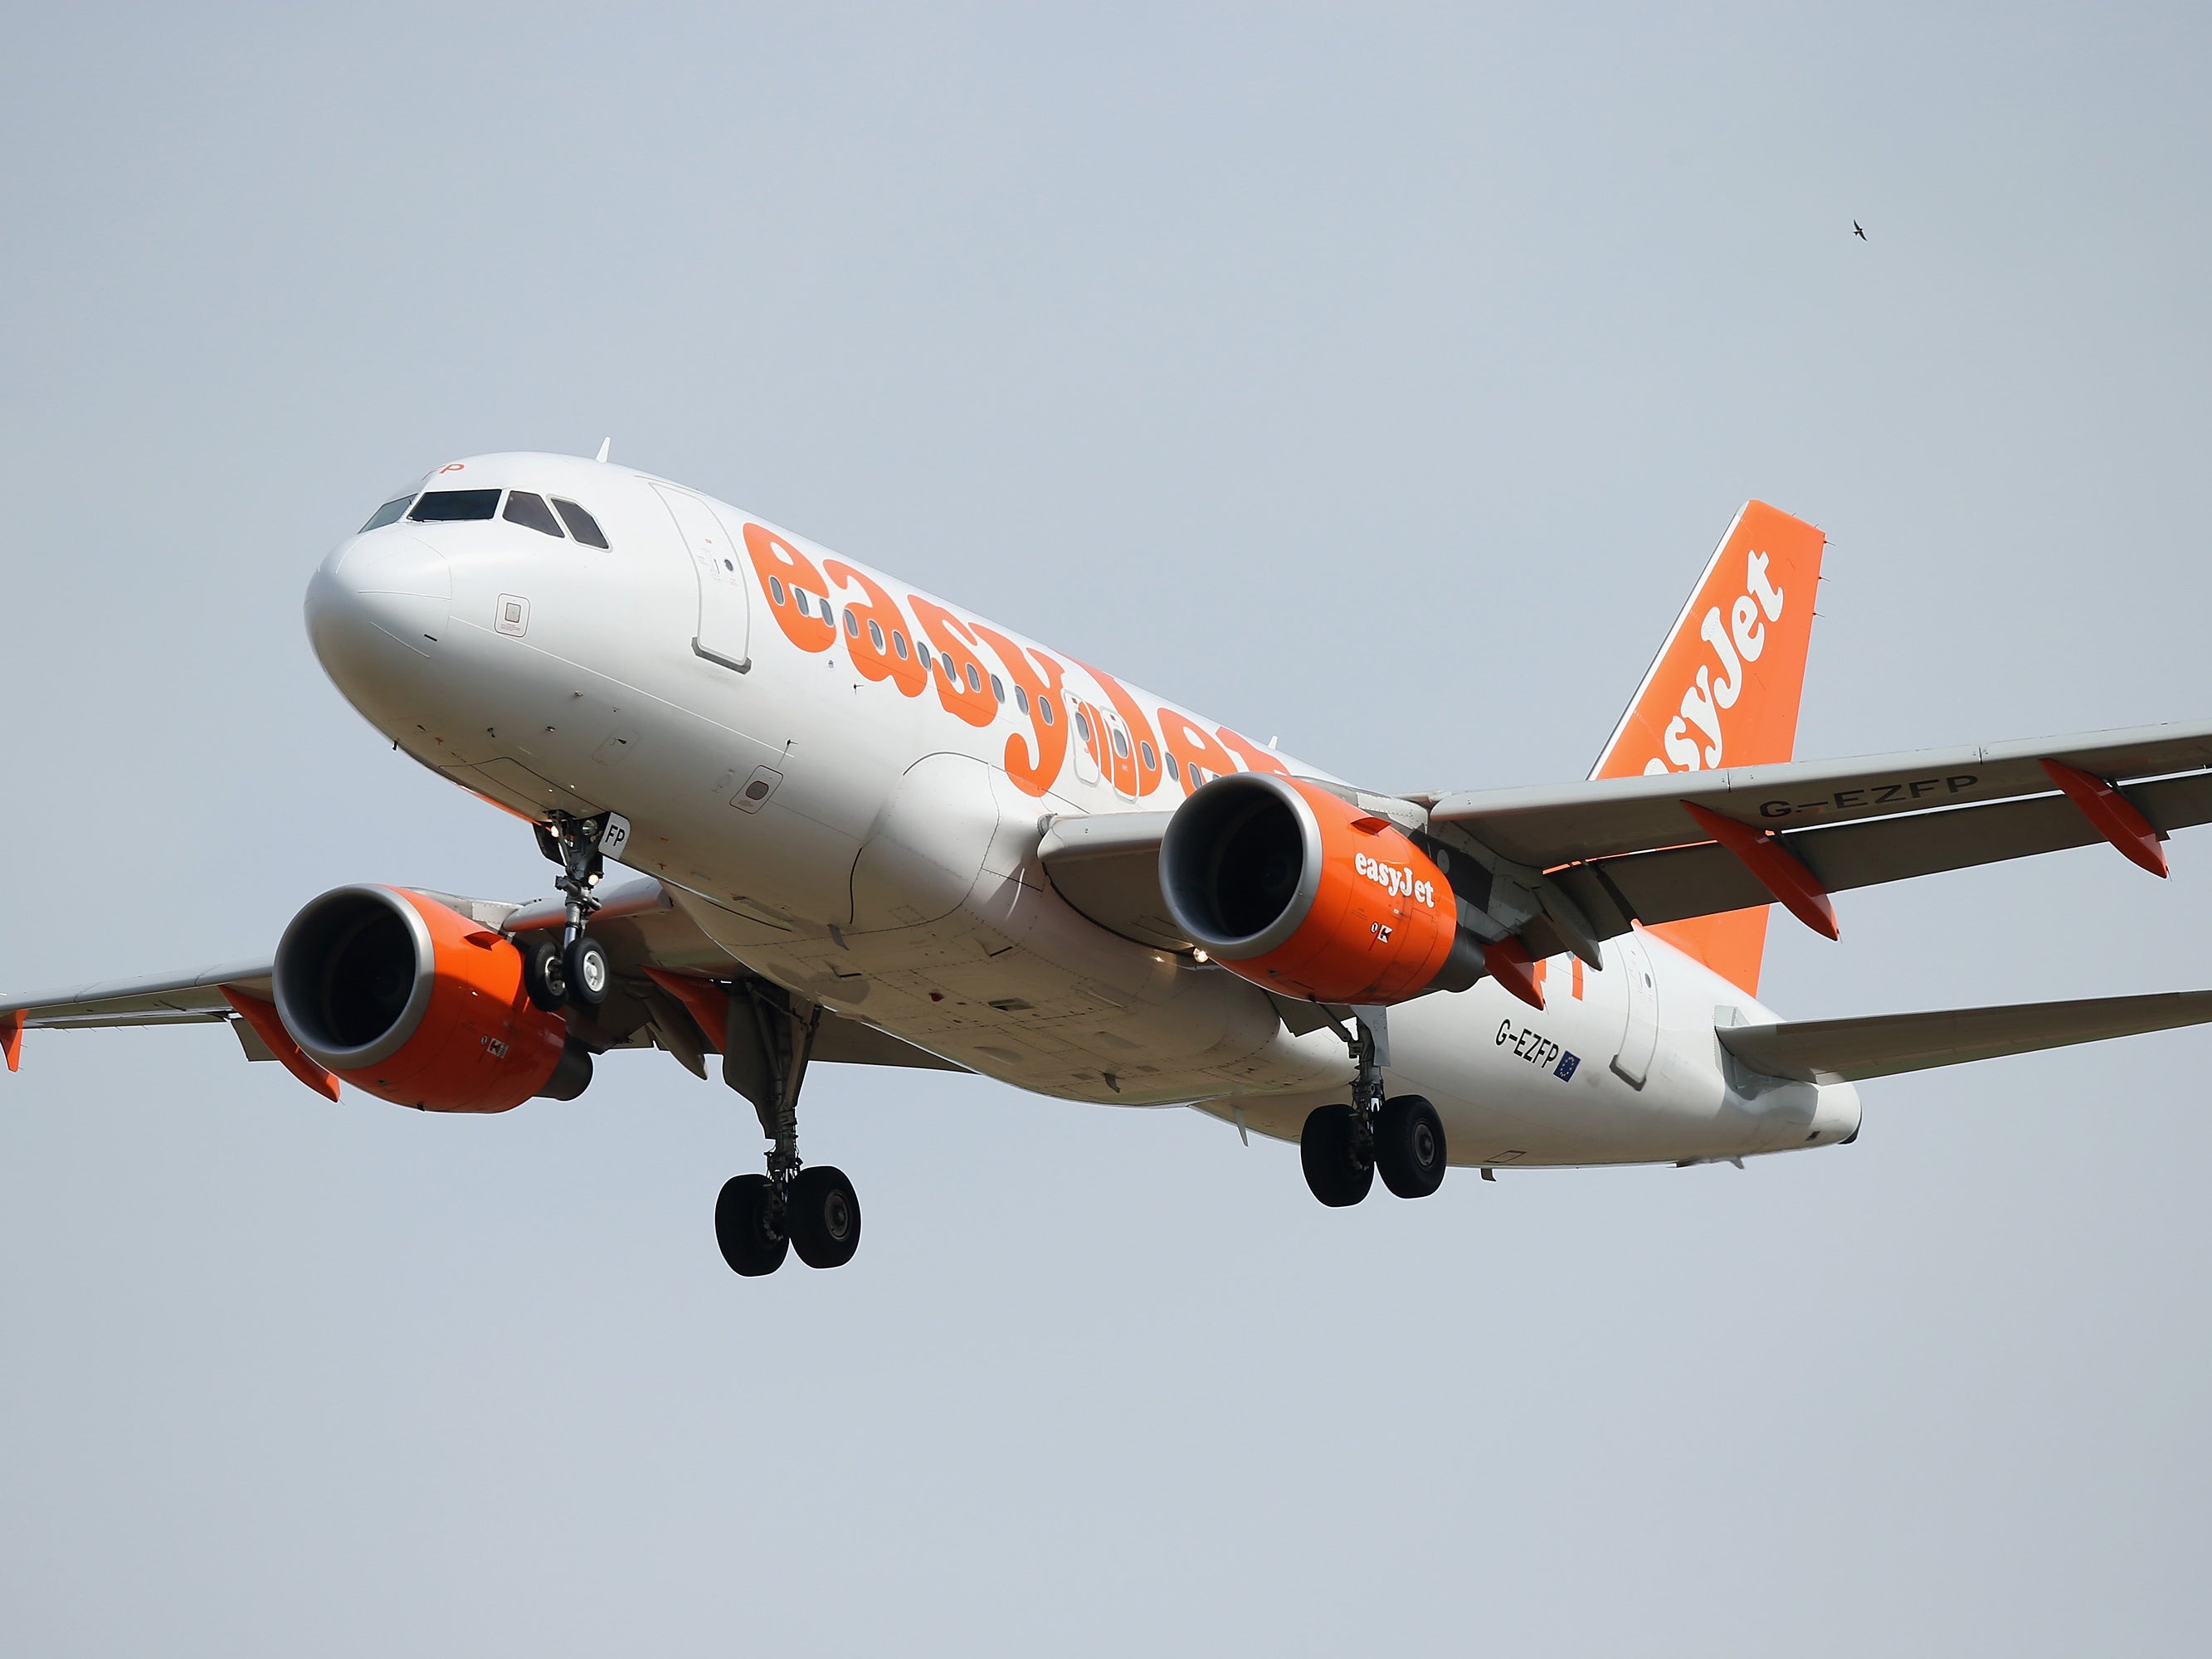 The man had refused to hand over his man-bag on an Easy Jet flight at Gatwick Airport